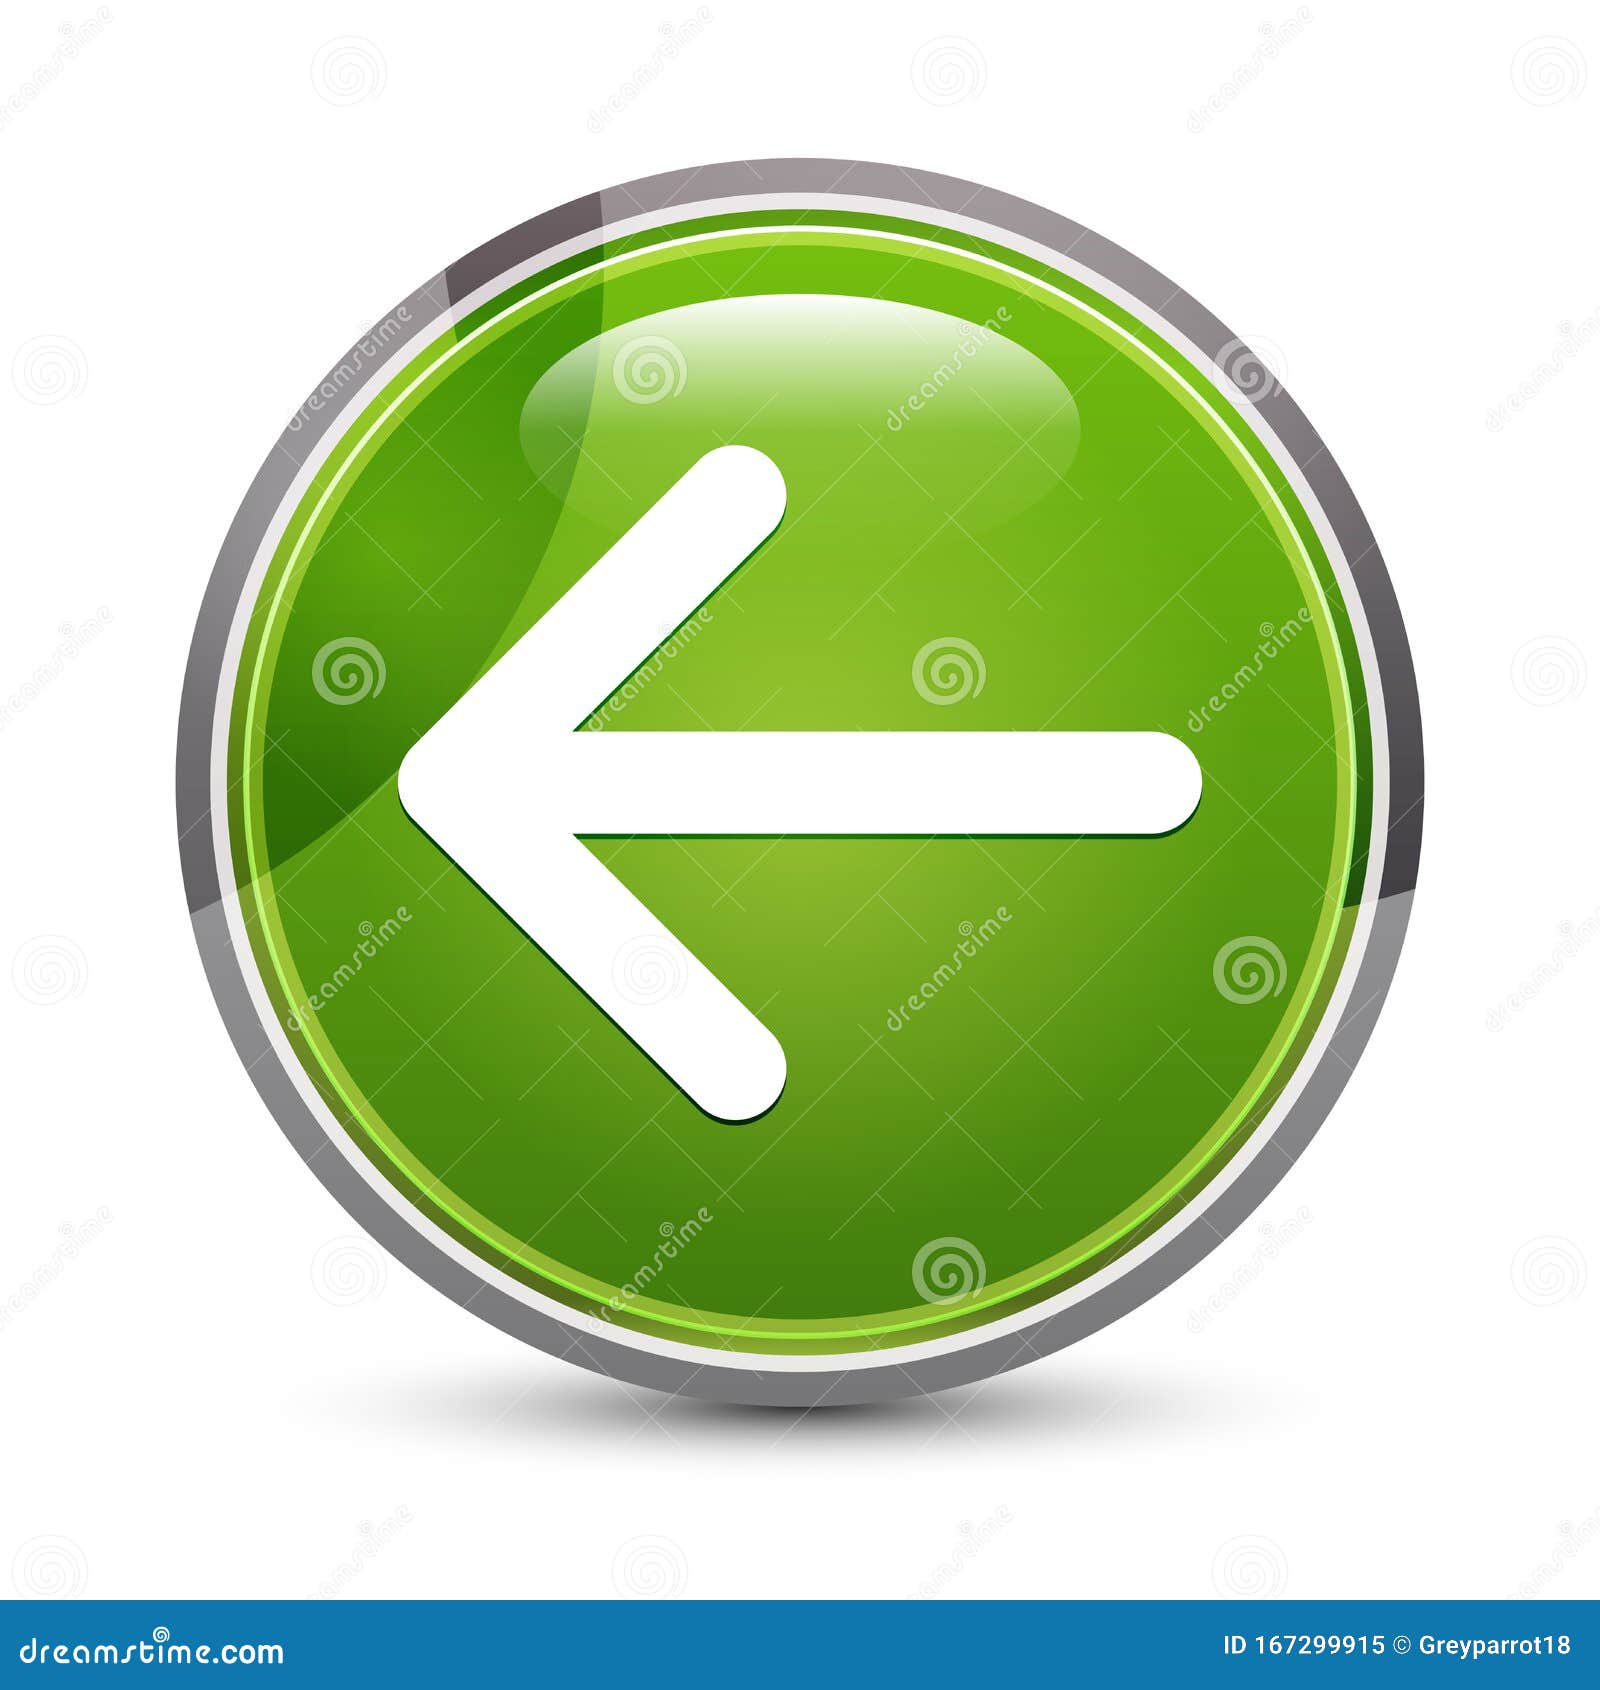 https://thumbs.dreamstime.com/z/back-arrow-icon-elegant-green-round-button-vector-illustration-isolated-167299915.jpg